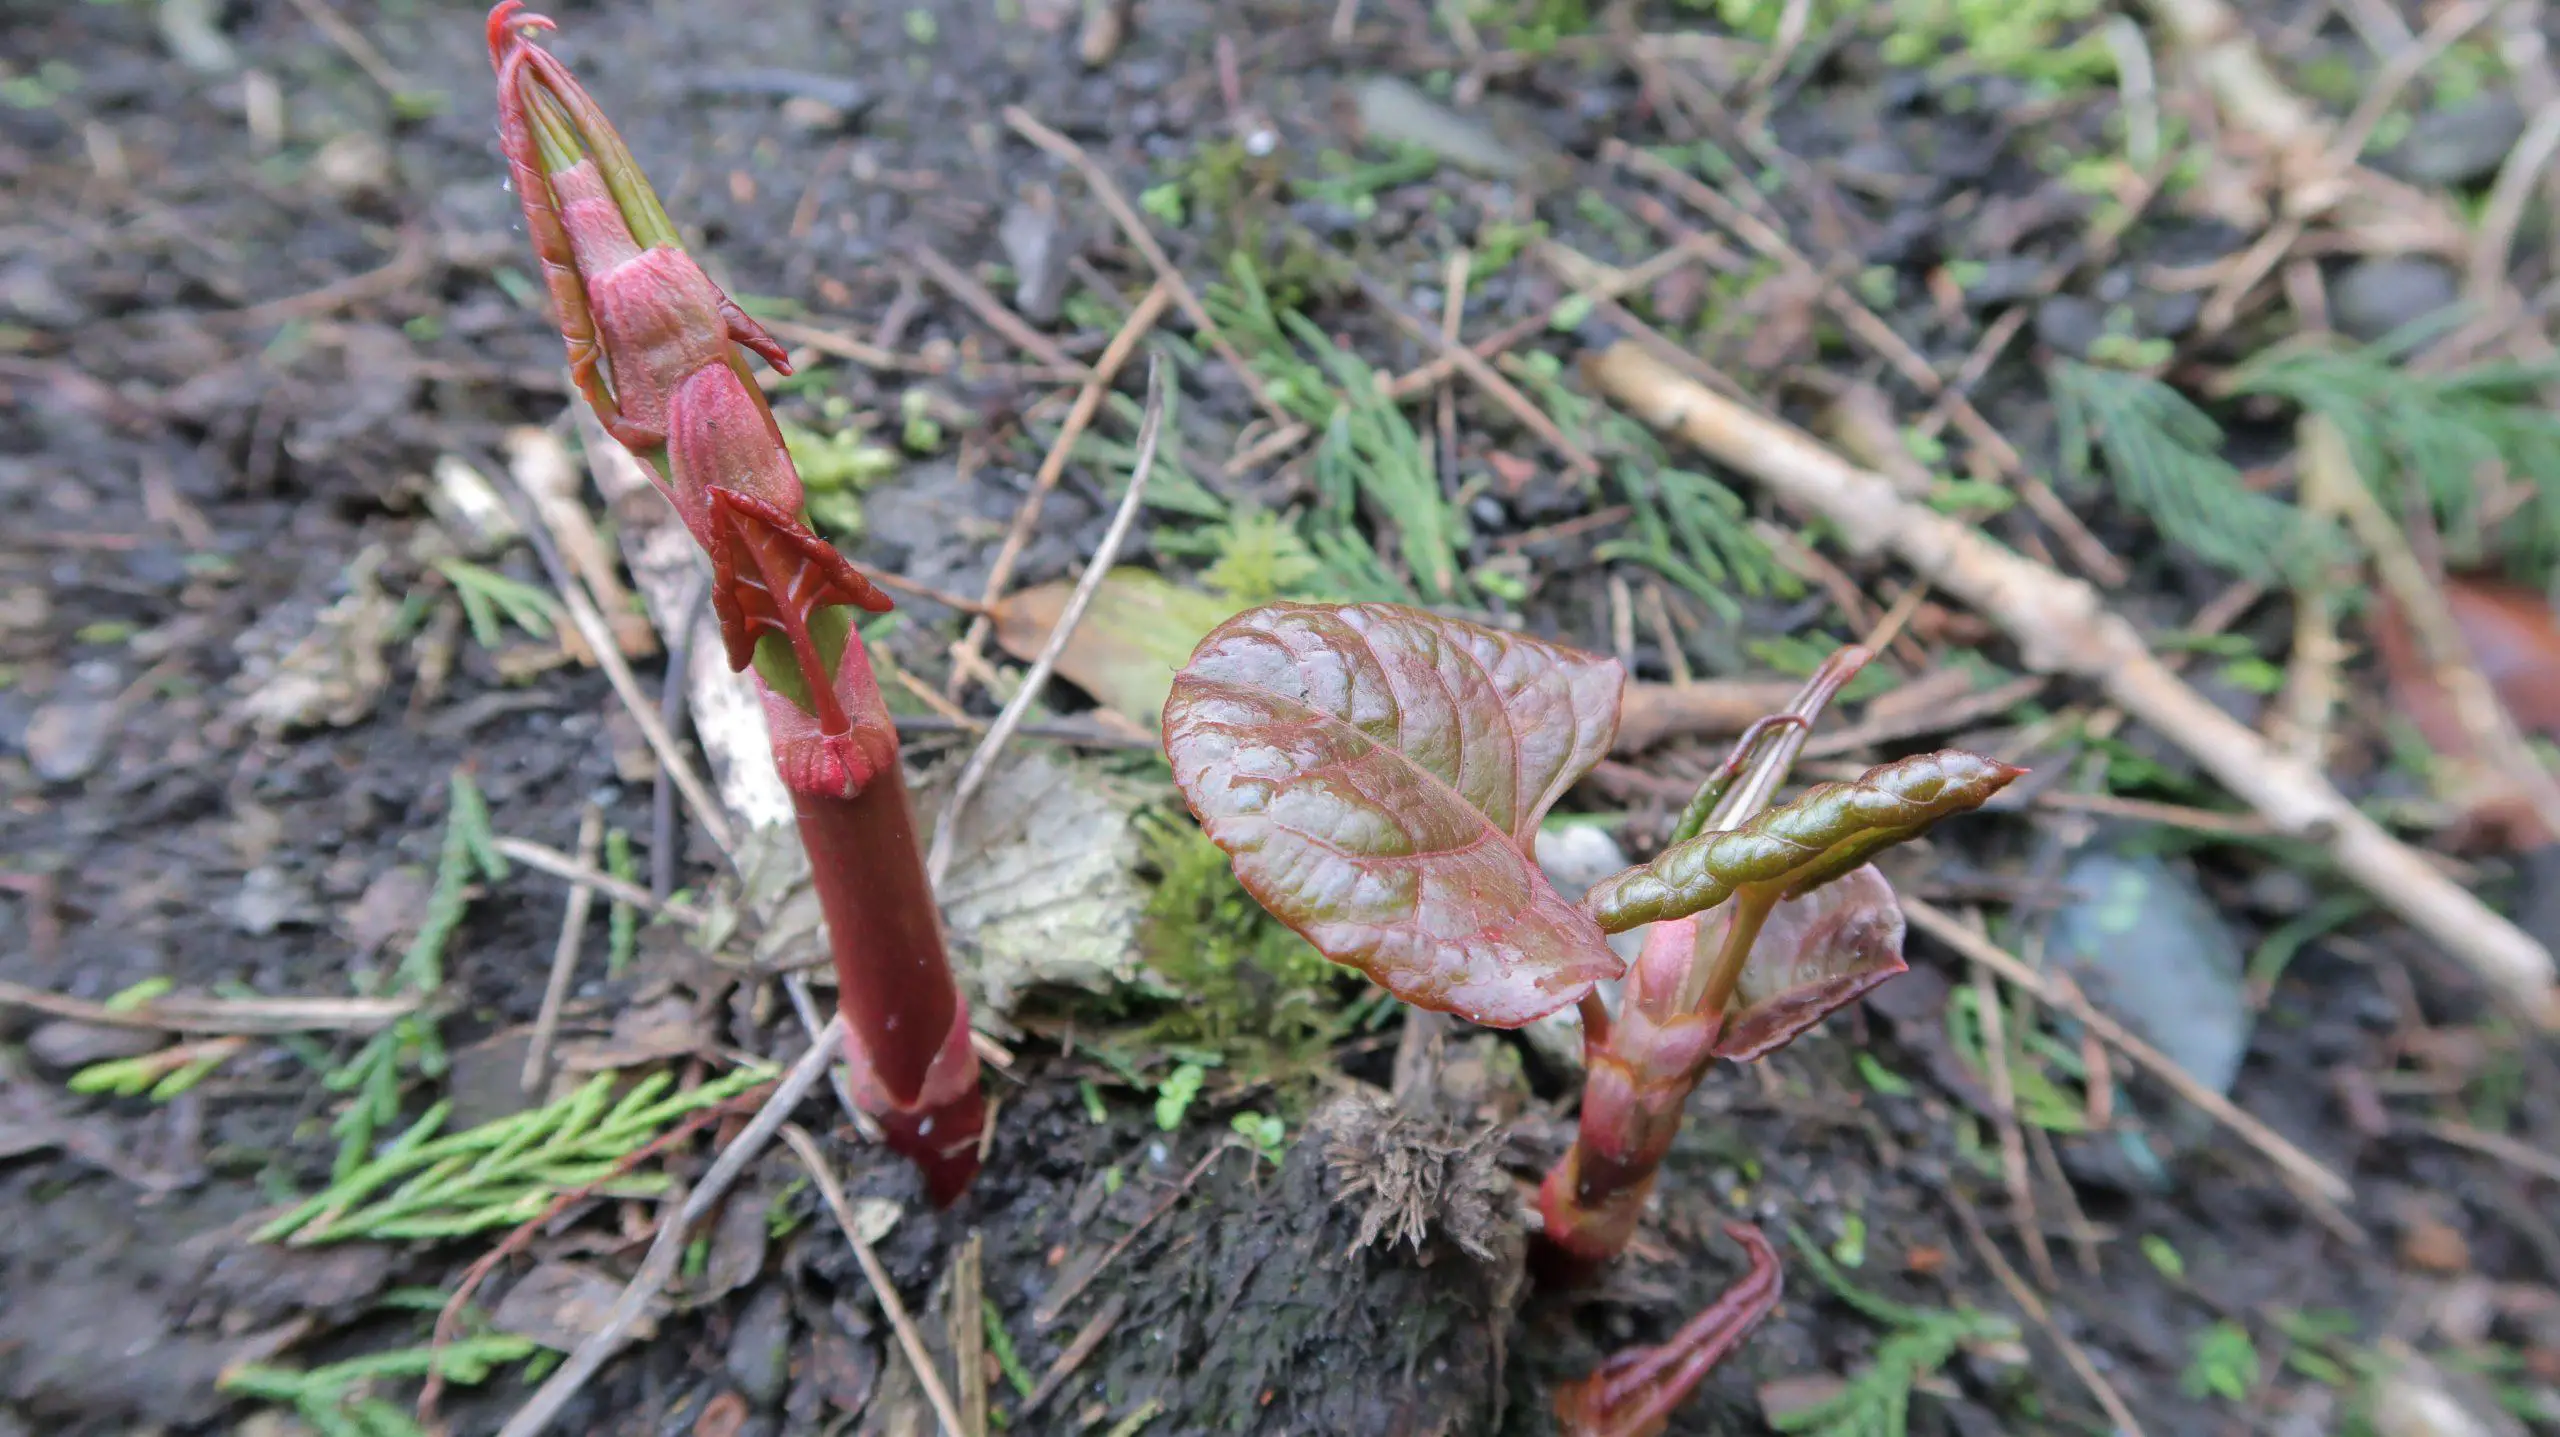 The signs of early Japanese knotweed shoots in late March spreading over fresh ground scaled